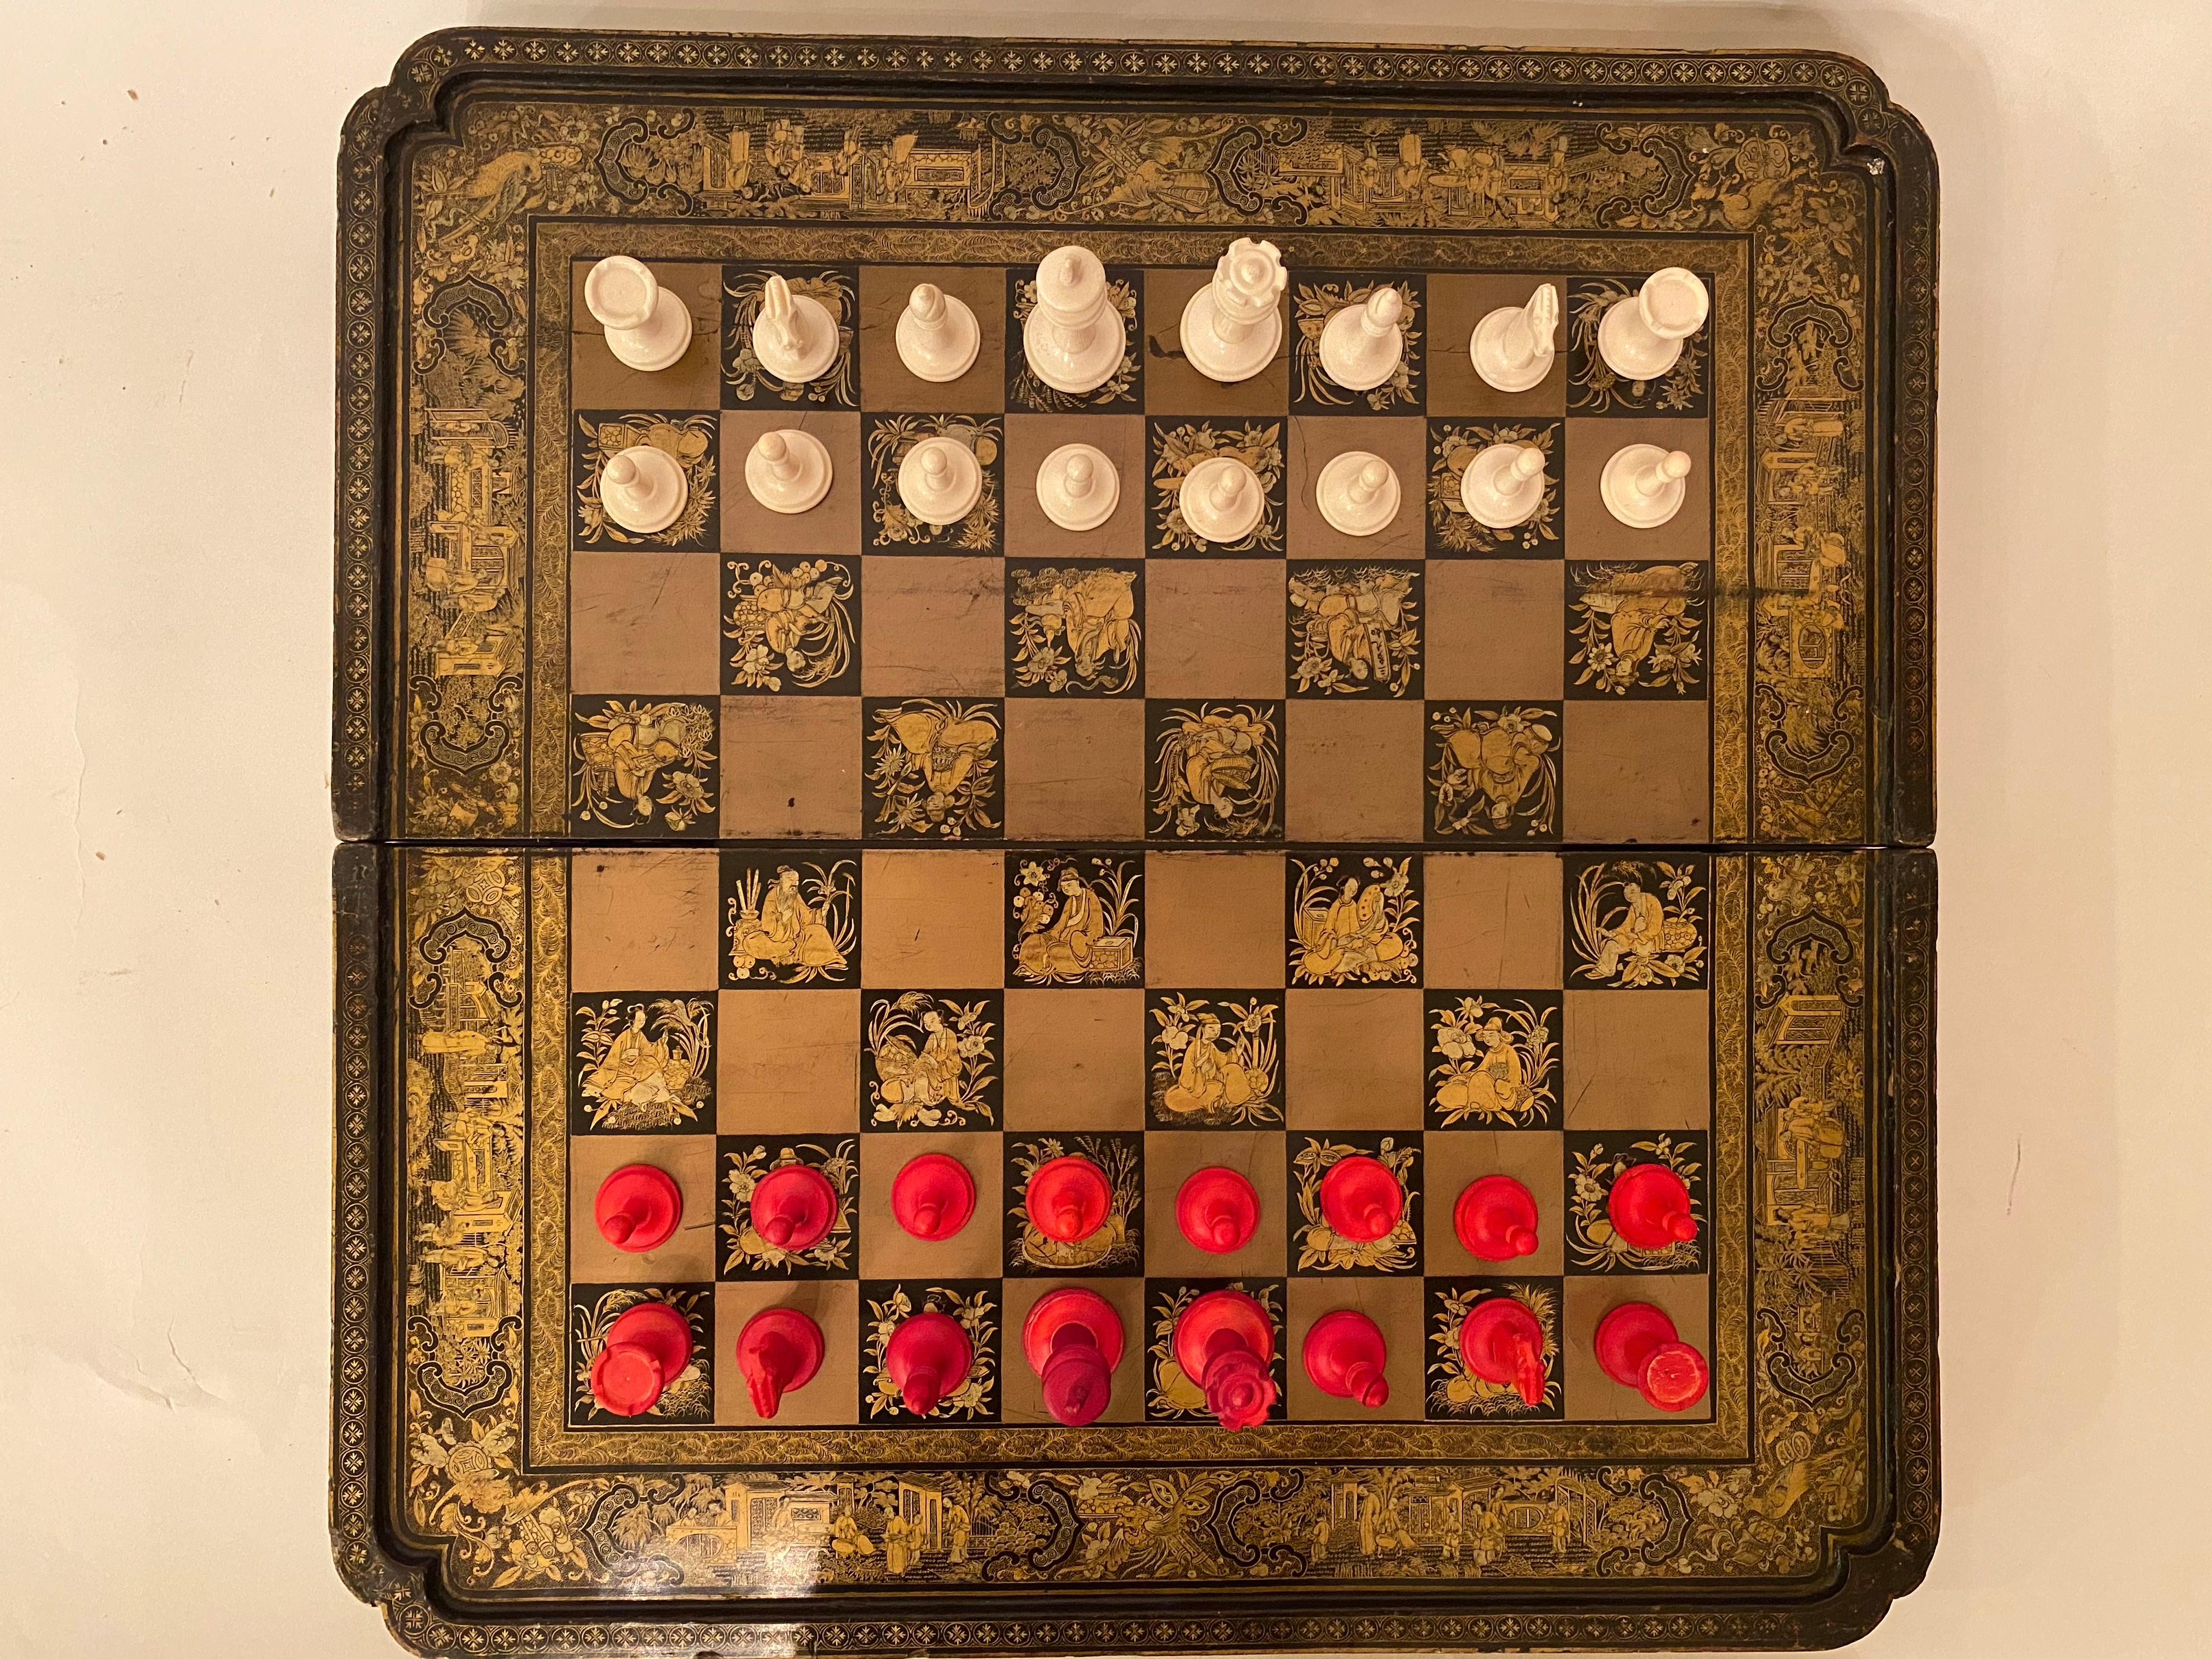 A early 19th century Chinese export lacquer chess and backgammon board 50 cm x 50 cm, the squares with daoist immortals gold black lacquer board, 16 white chesses, 16 red chesses.